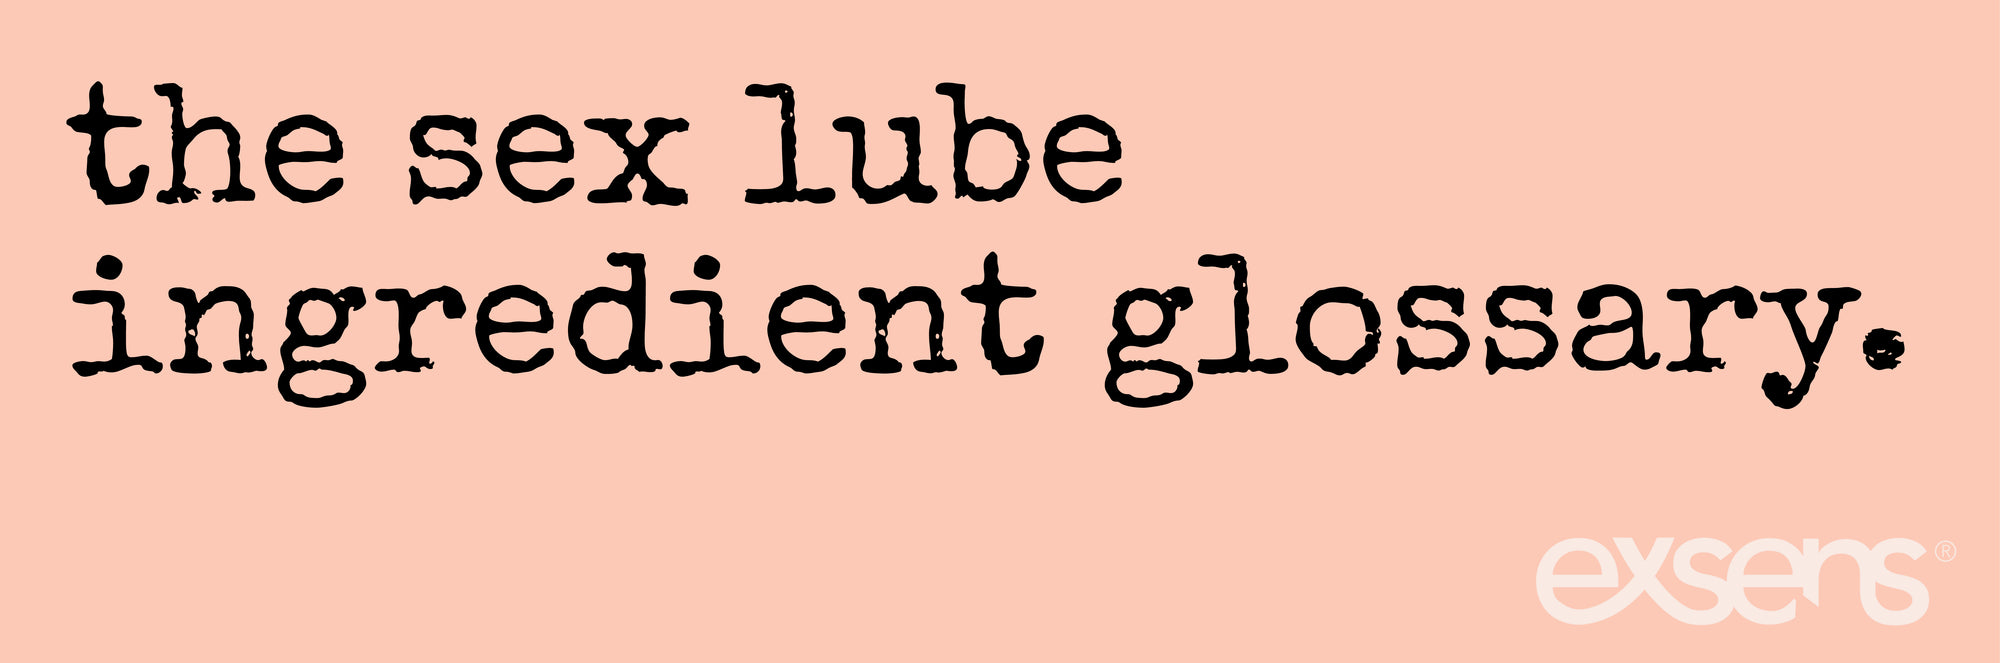 Lube Lessons 3: The Sex Lube Ingredient Glossary